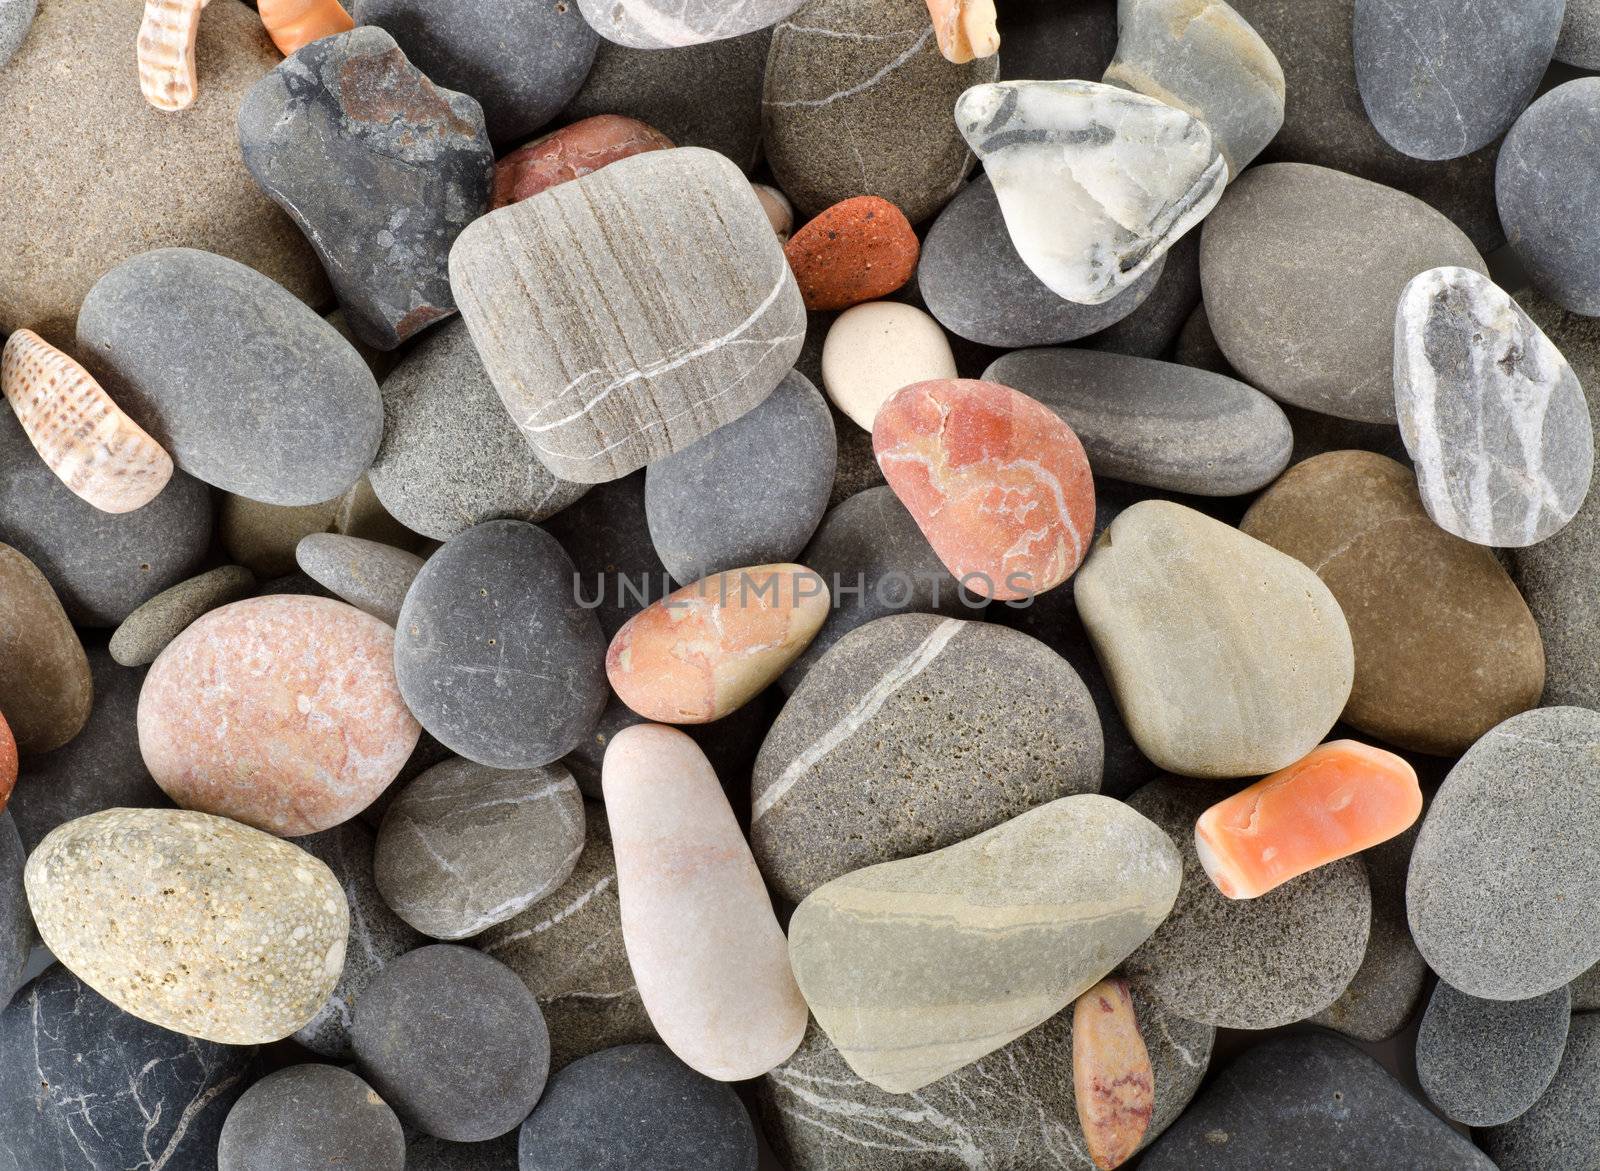 Background shot of pastel colored stones. Shot on the shore of black sea.